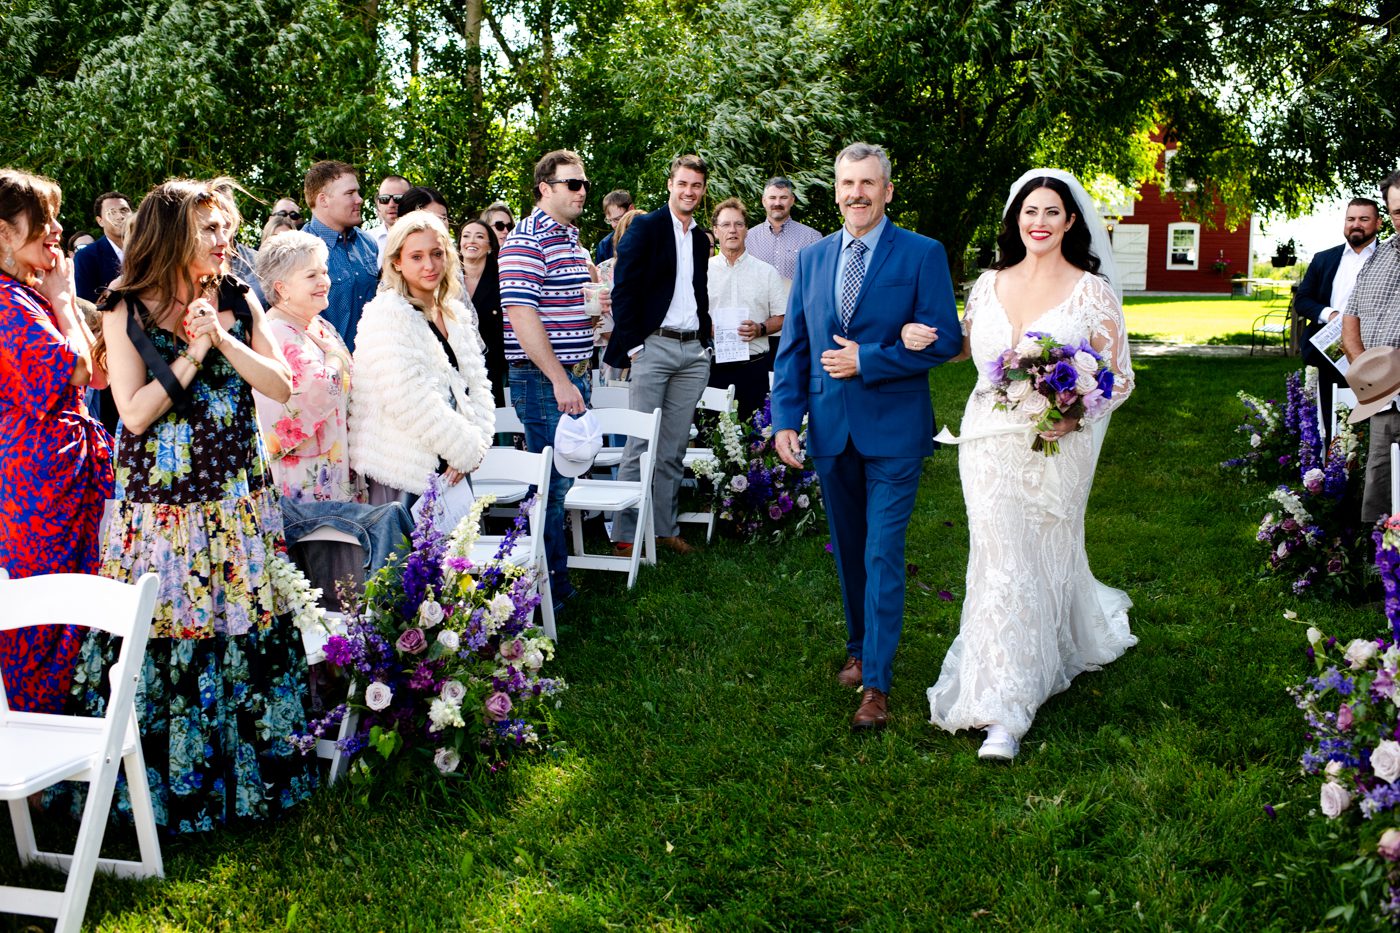 guests-watch-bride-walk-down-aisle-with-dad-at-roys-barn